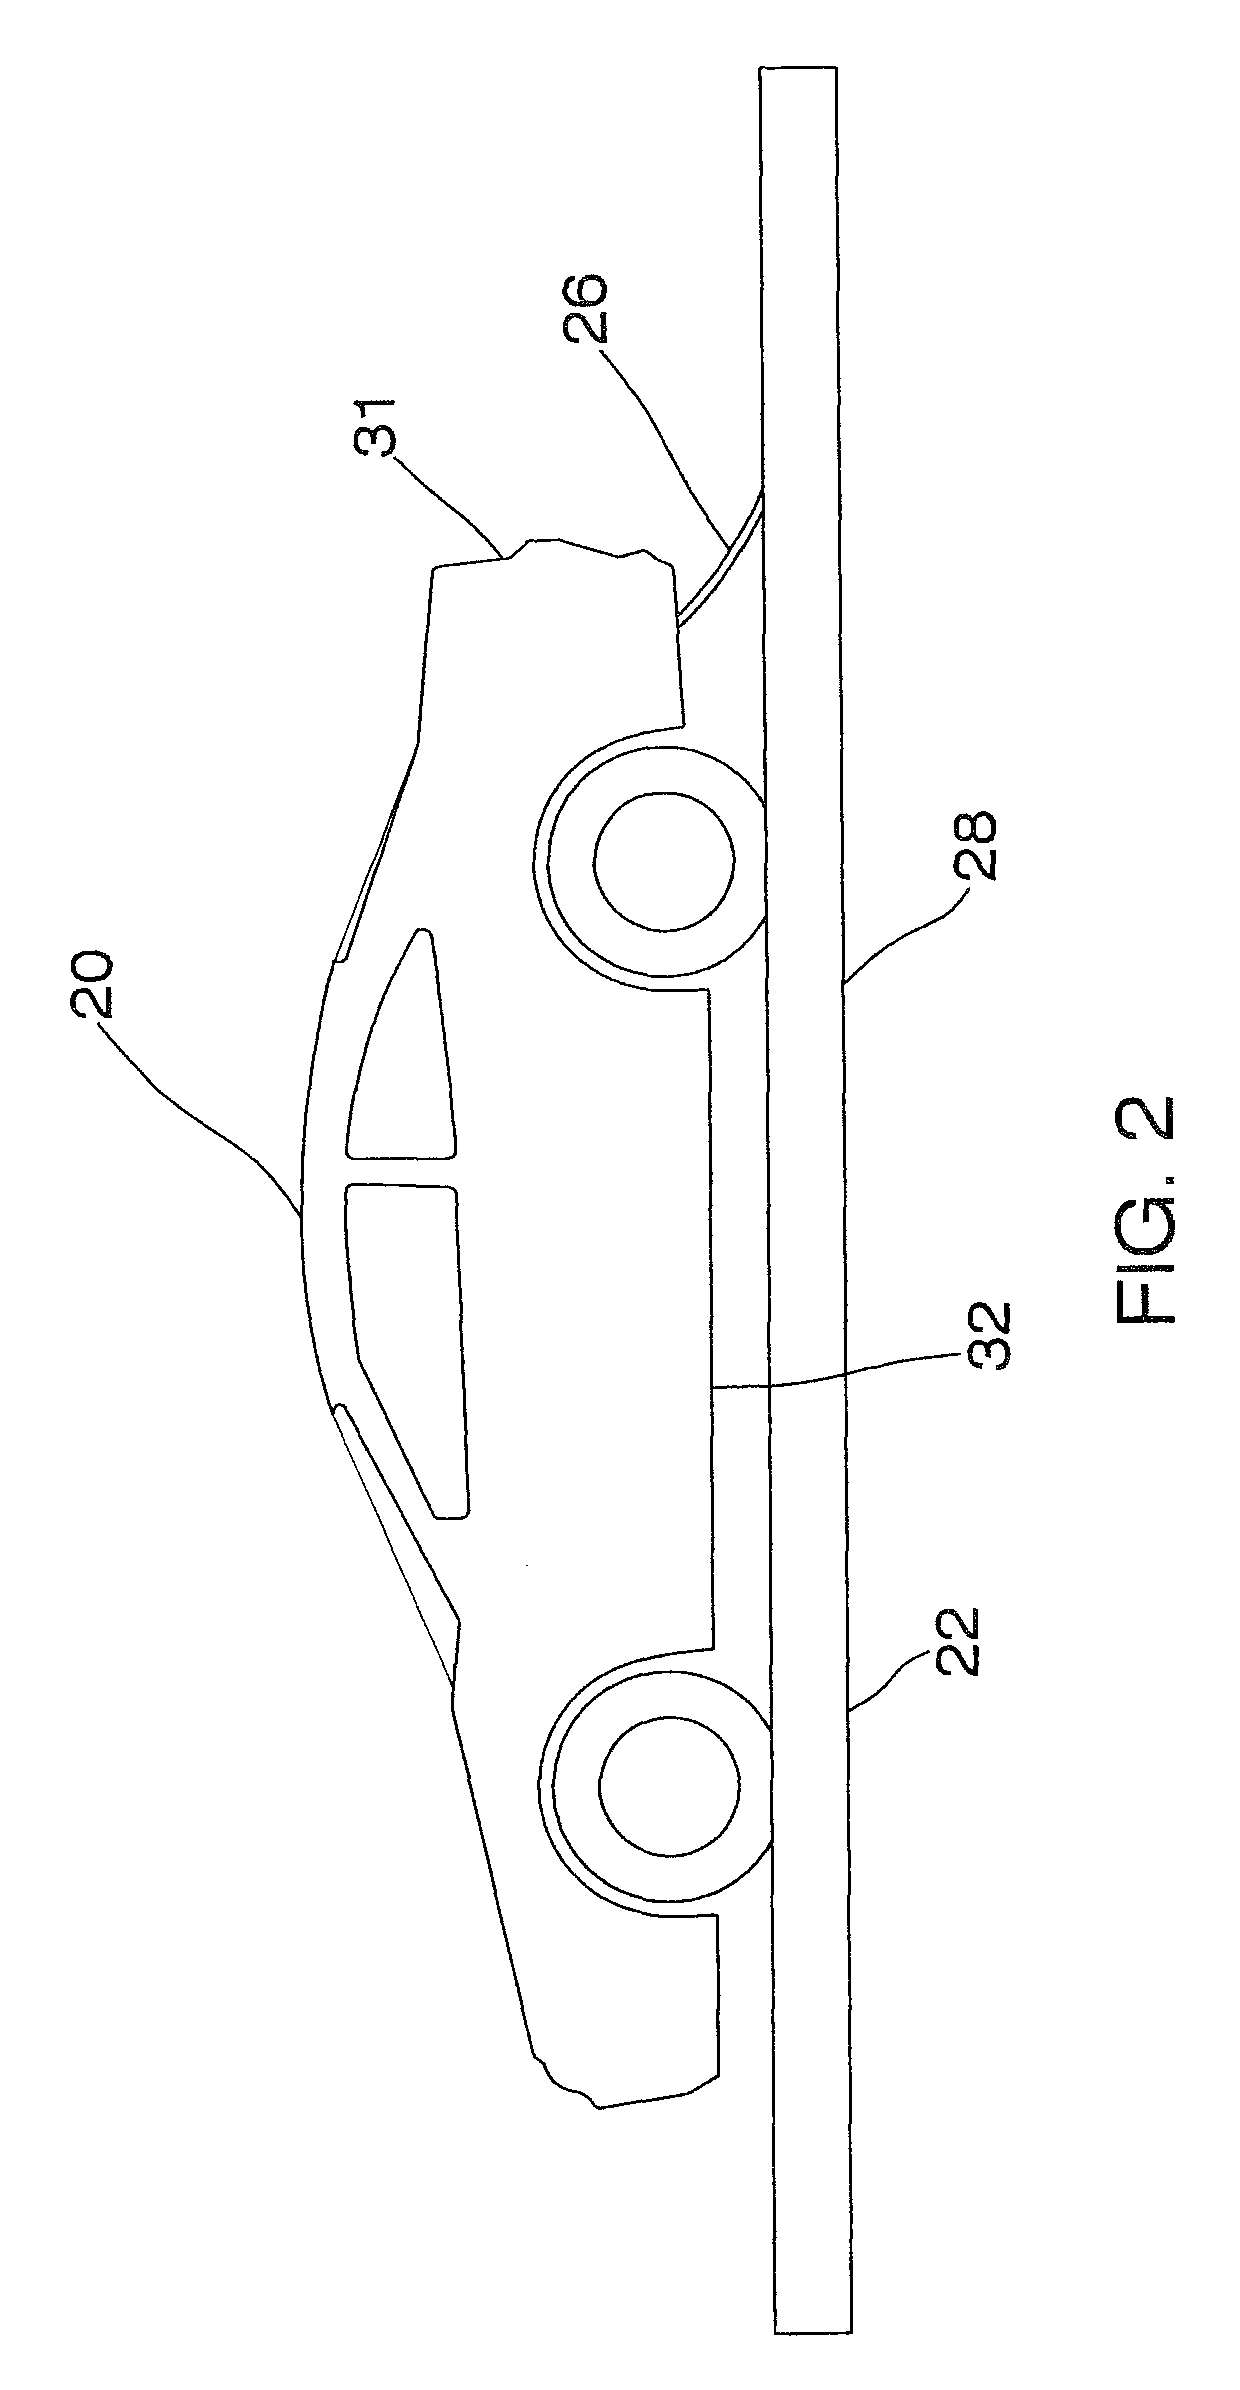 Method and apparatus for protecting charging devices from surges and lightning strikes